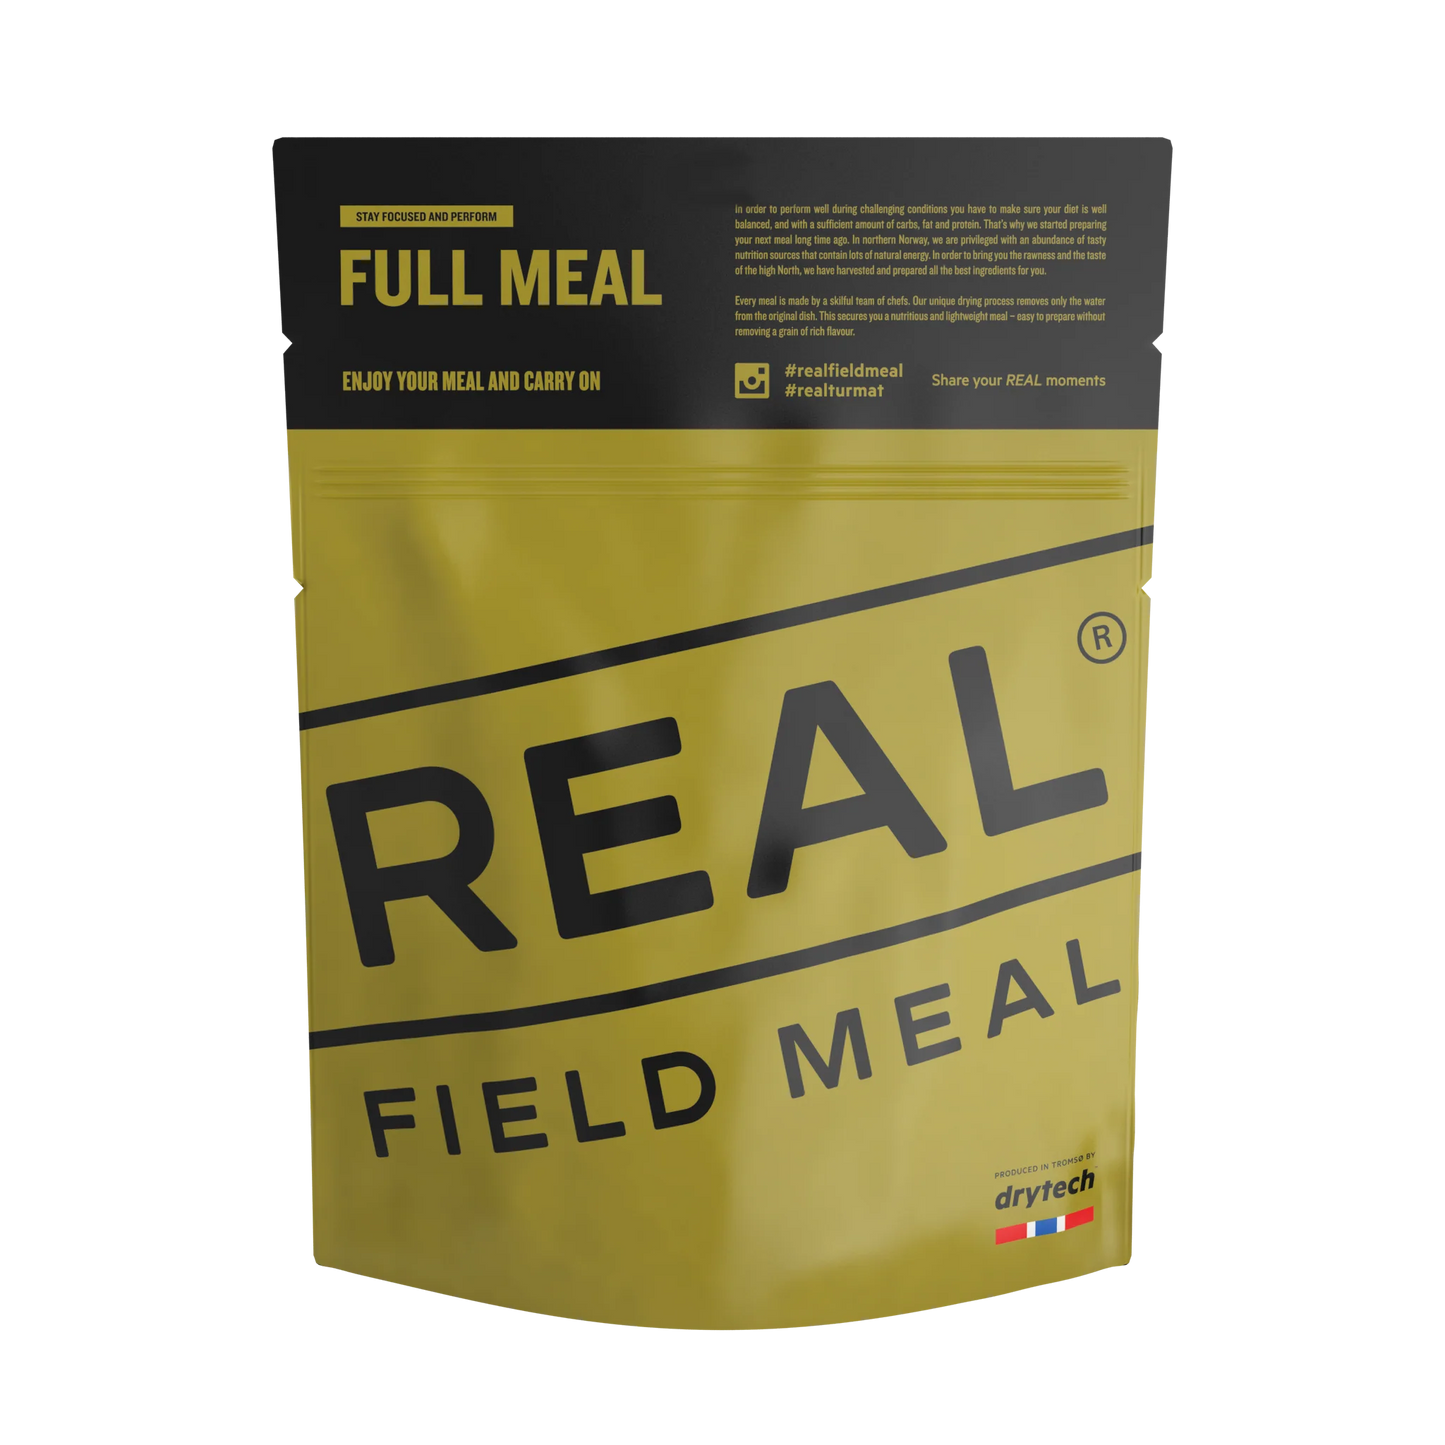 Real Field Meal - Couscous with Lentils and Spinach (700kcal) Pouches - BULK BUY